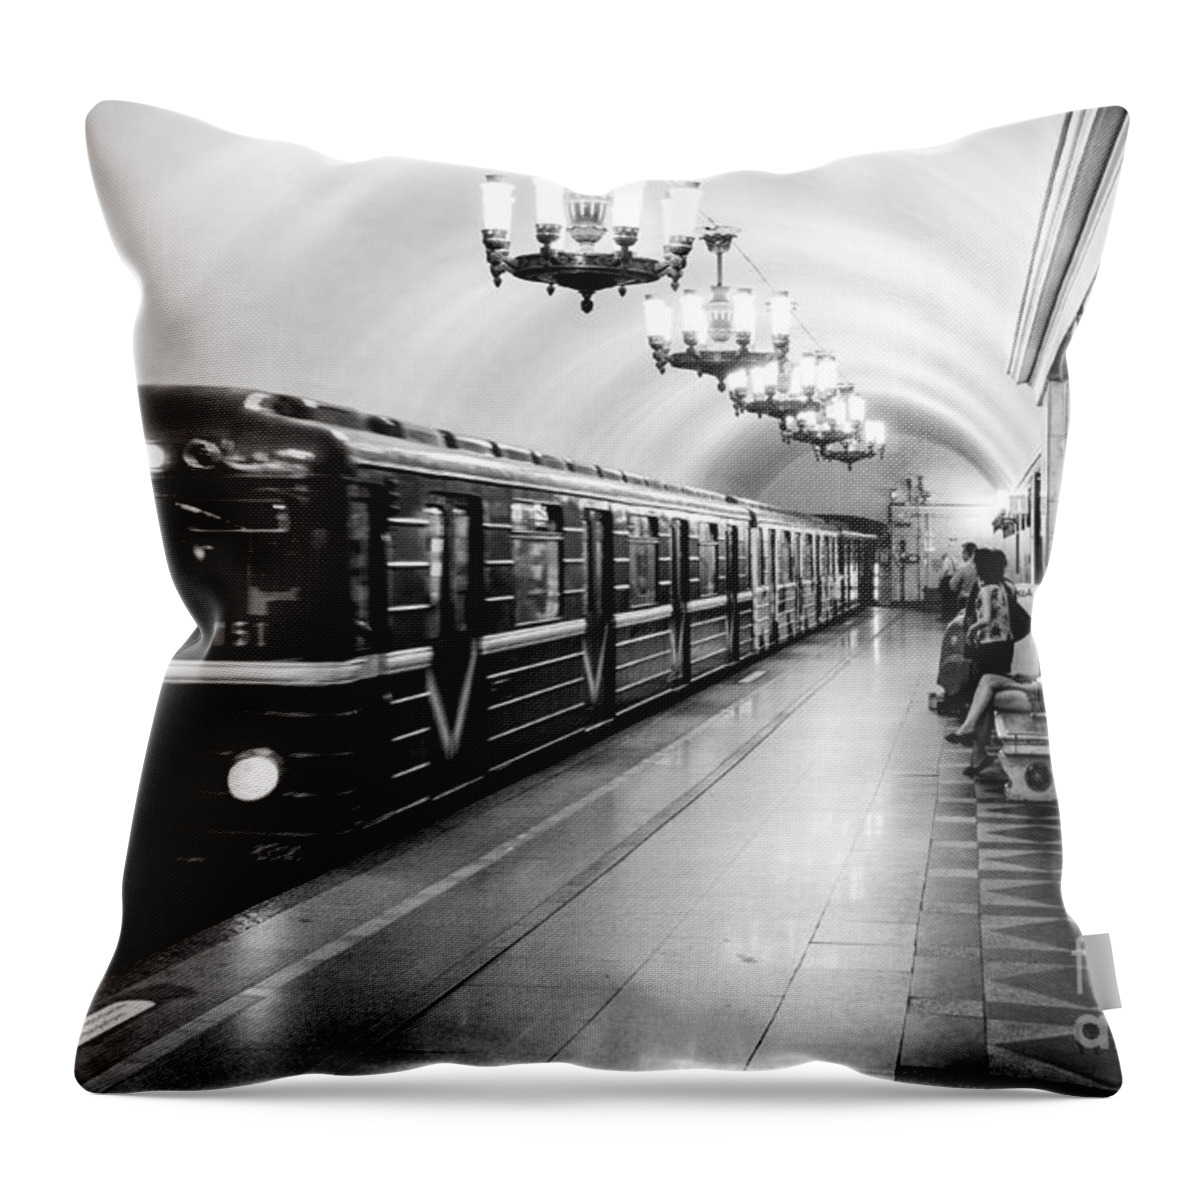 Russia Throw Pillow featuring the photograph St Petersburg Russia Subway Station by Thomas Marchessault